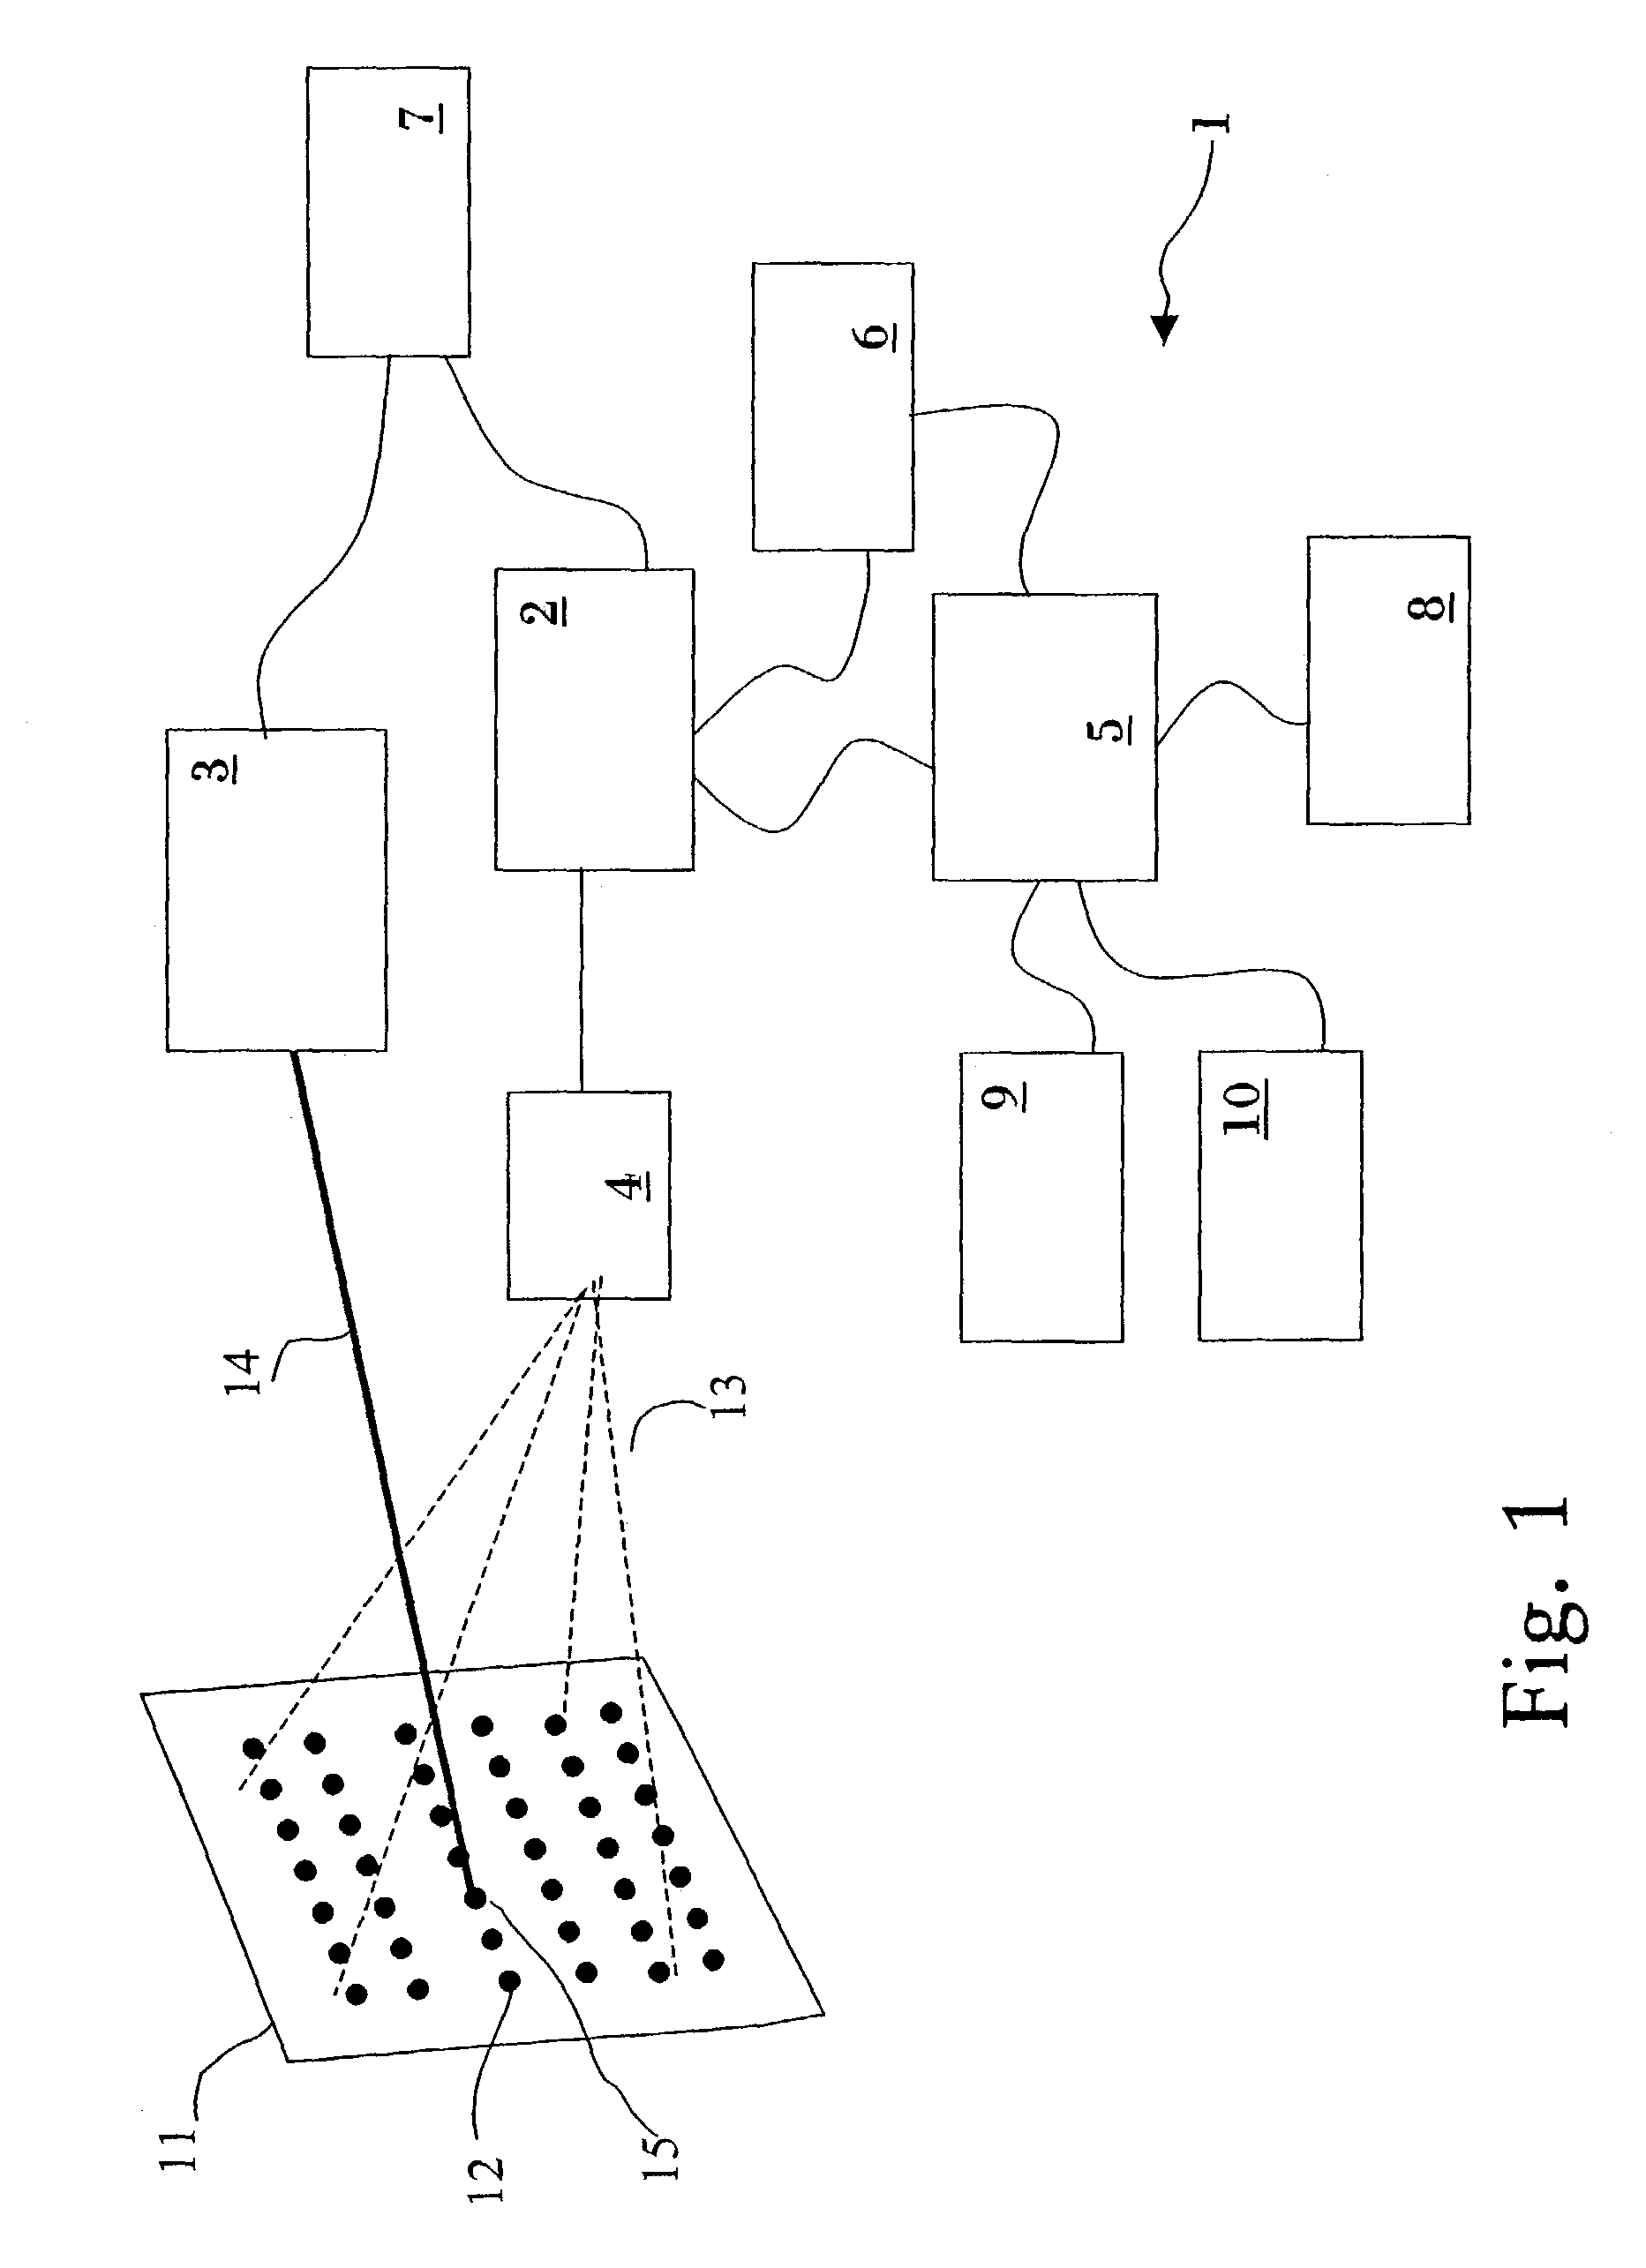 Image capture device and method of selecting and capturing a desired portion of text